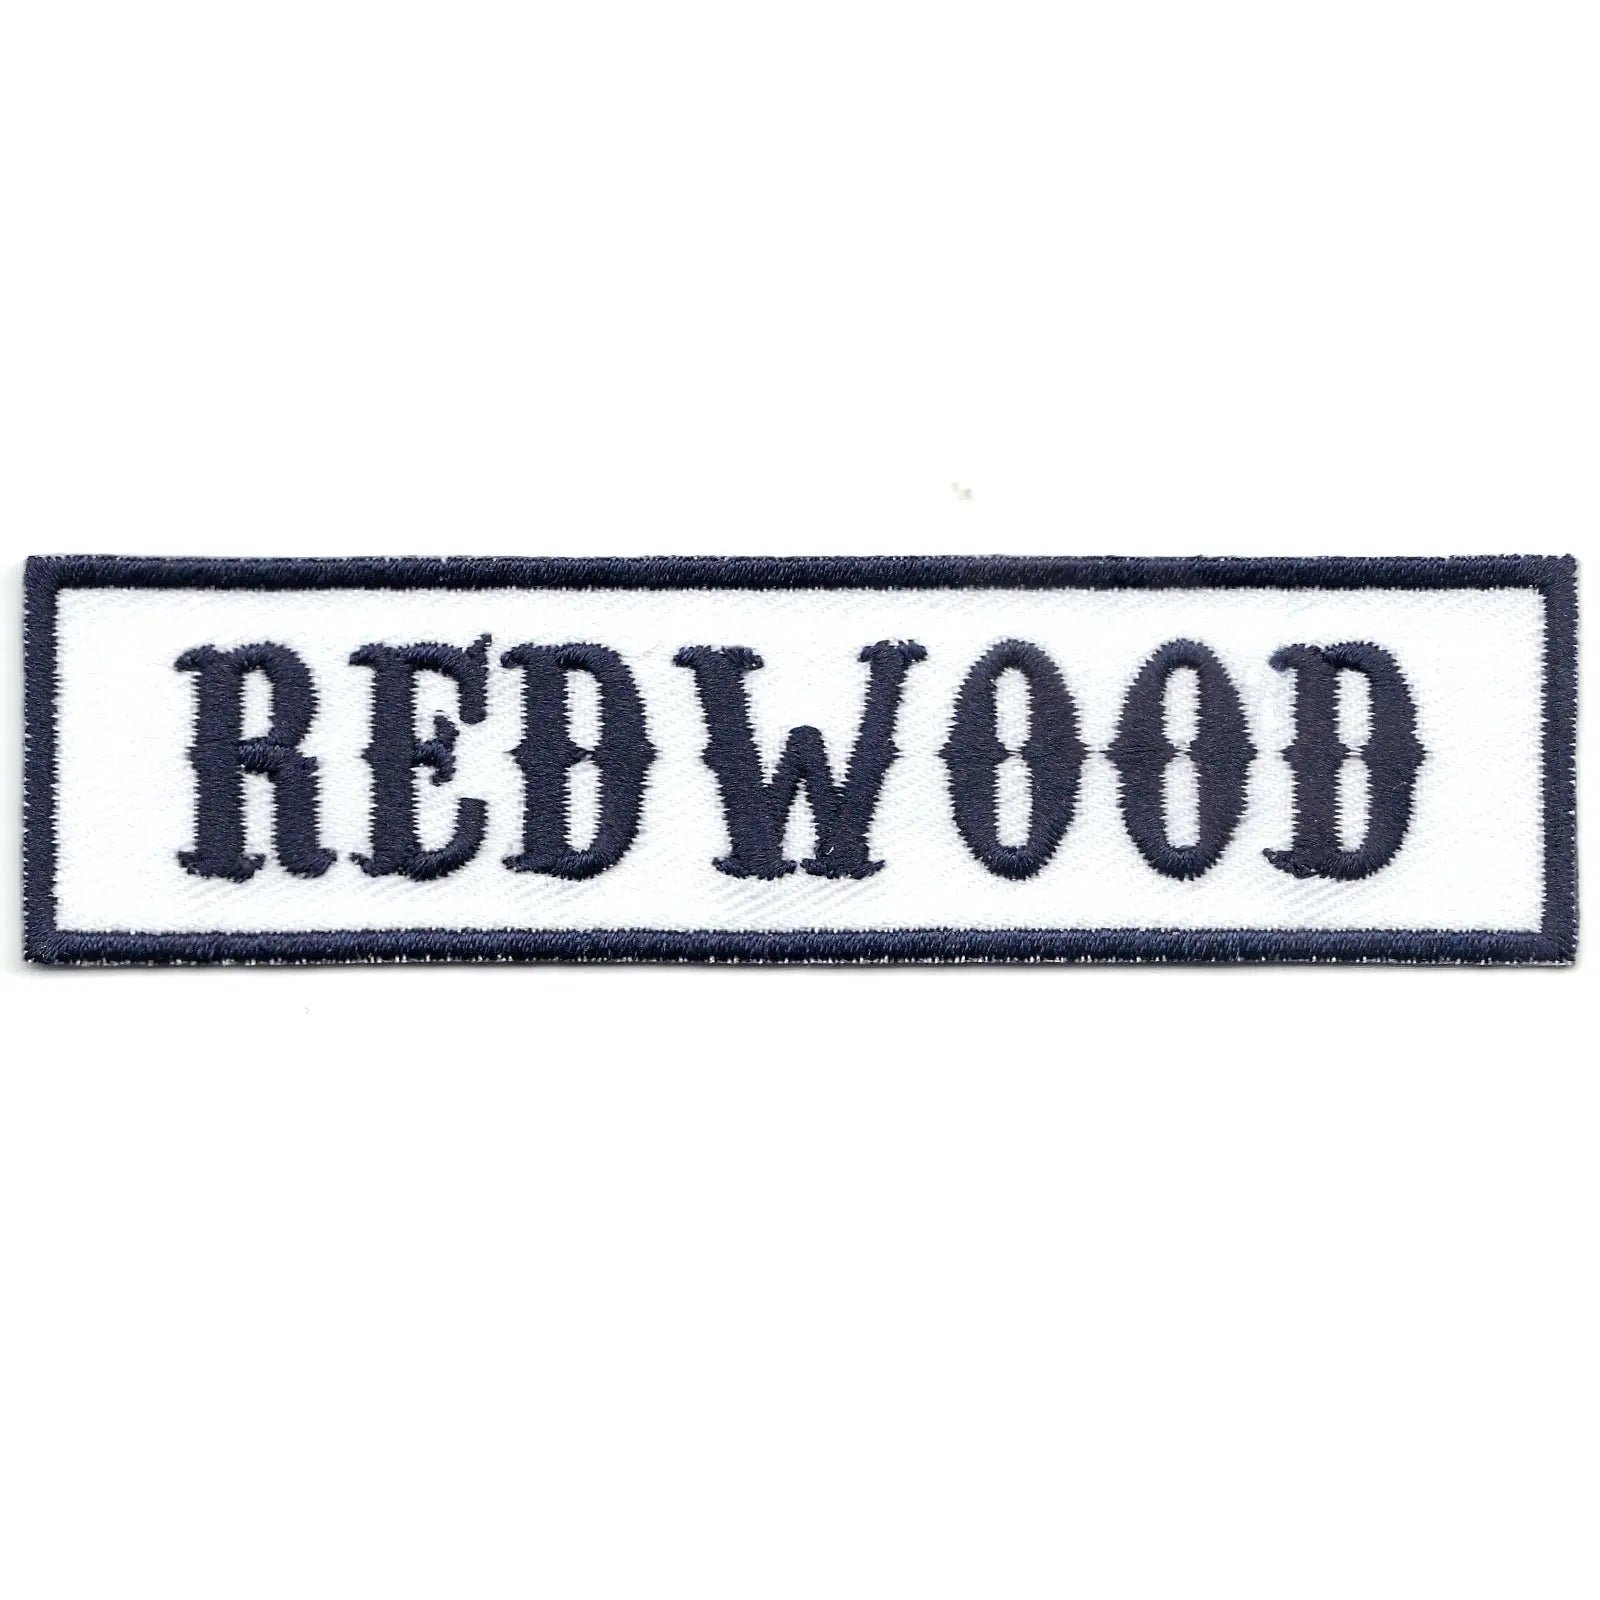 Redwood Blue On White Bikers Club Iron On Patch 